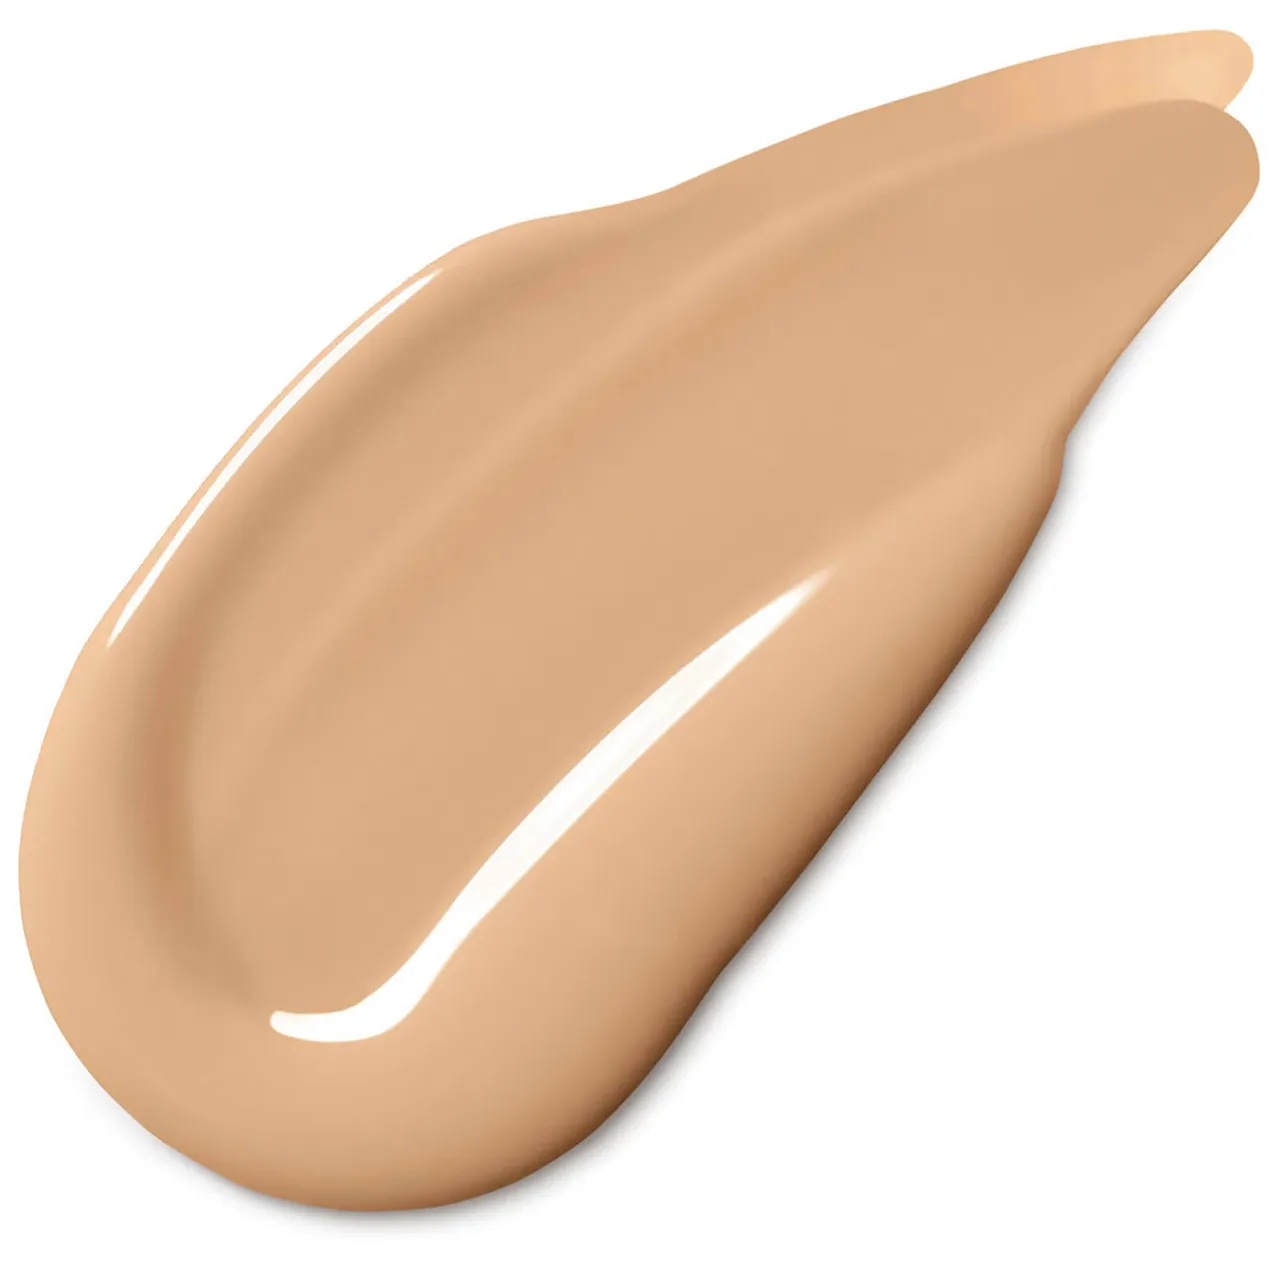 Clinique Even Better Clinical Serum Foundation SPF20 30ml (Various Shades) - Stone